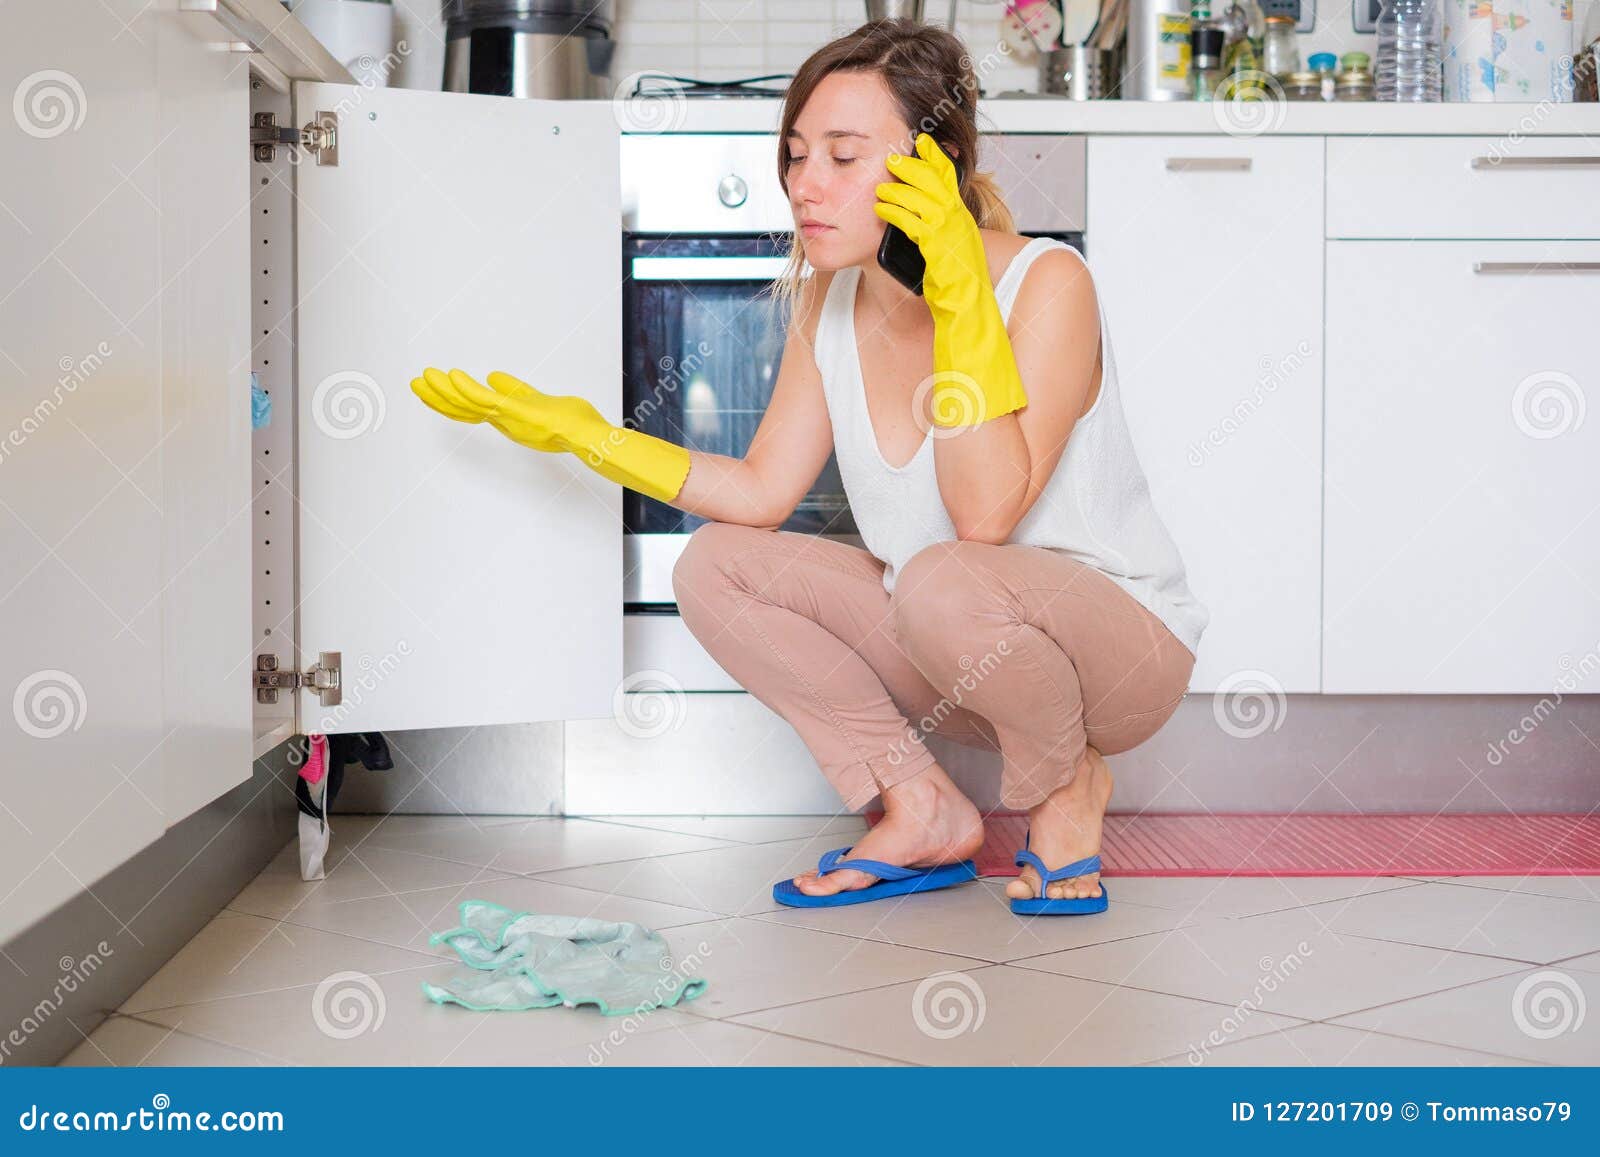 Desperate Housewife Calling Plumber Quick Service Stoc pic